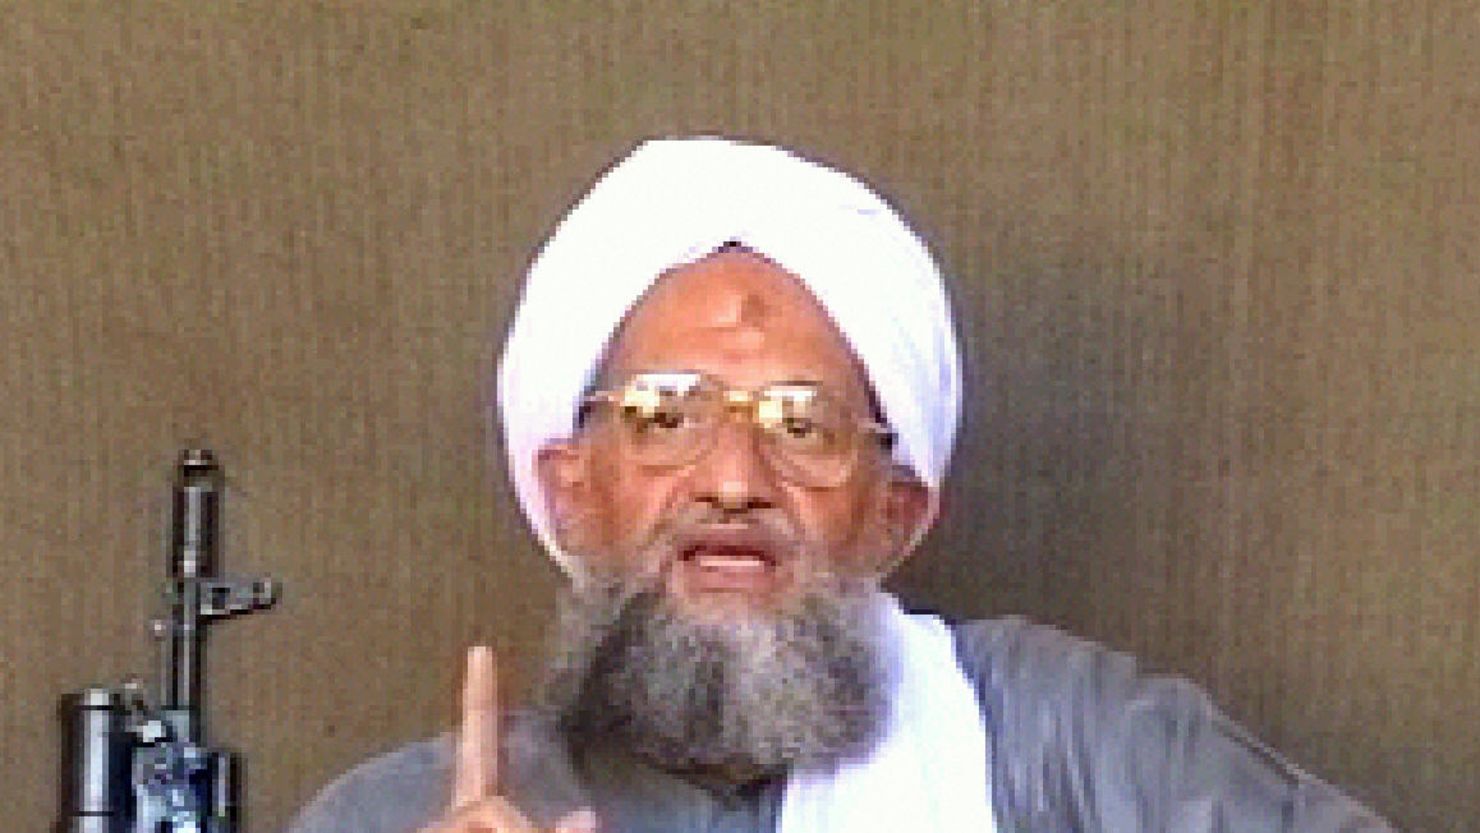 This file photo shows Al Qaeda leader Ayman al-Zawahiri, who purportedly posted an audio message about Egypt.